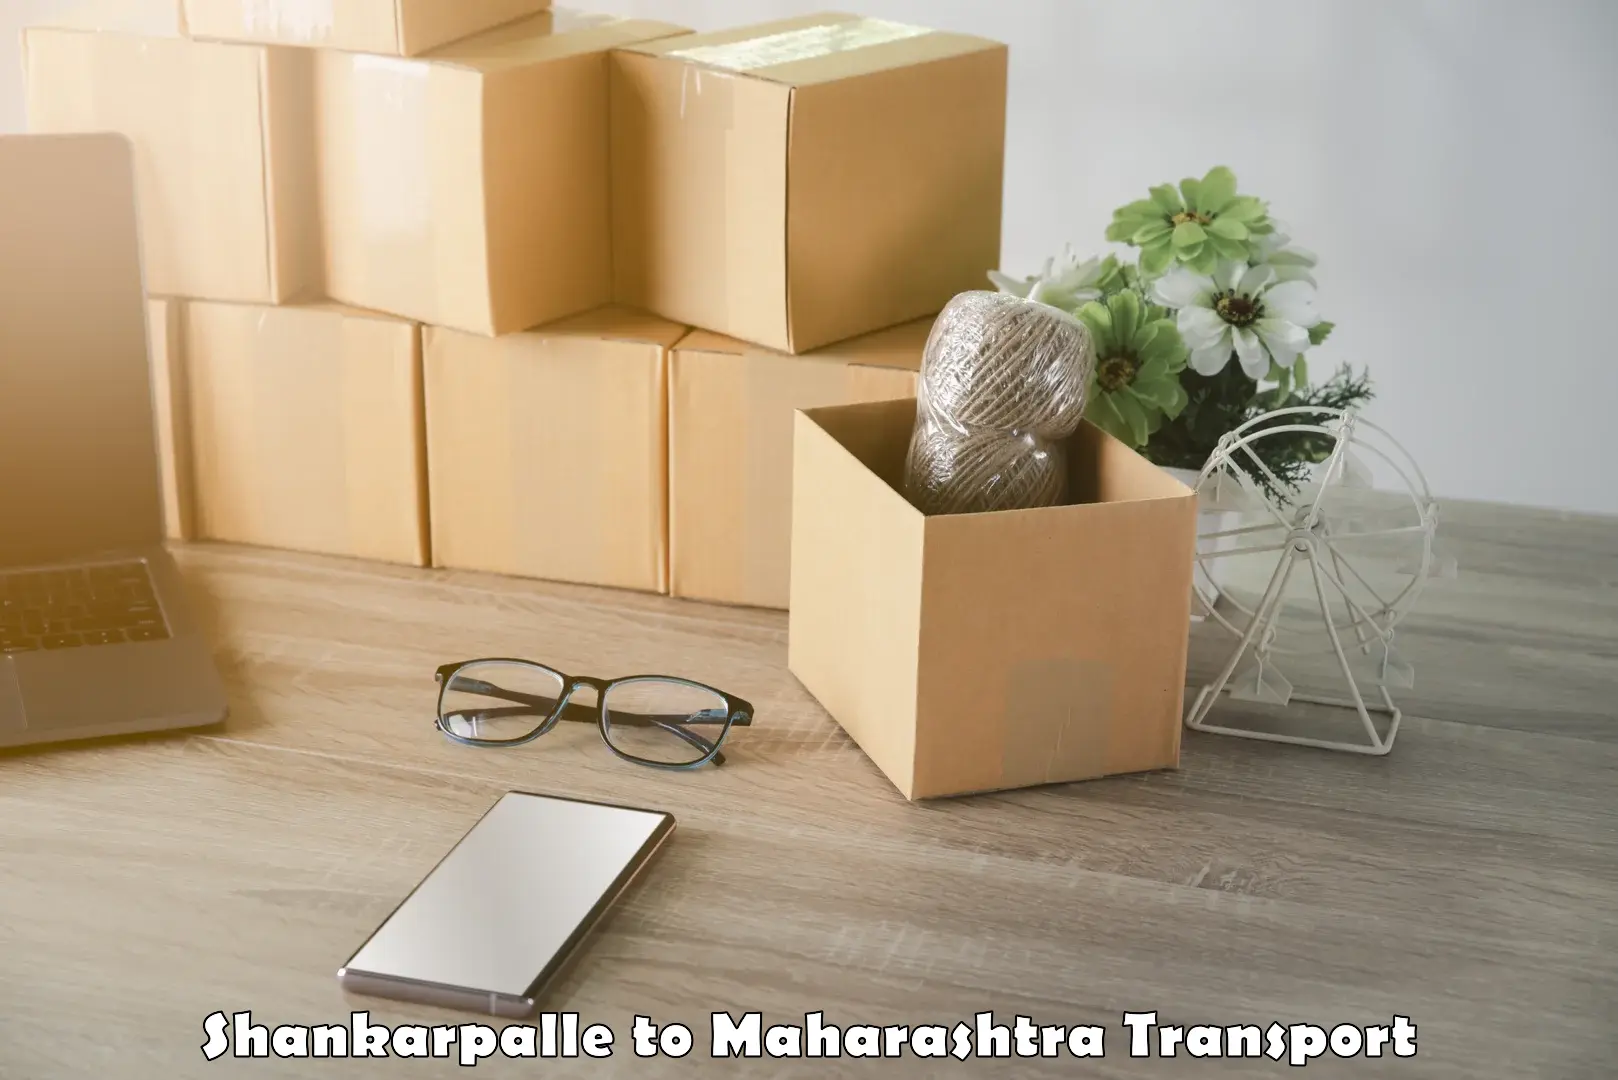 Parcel transport services in Shankarpalle to Mahad